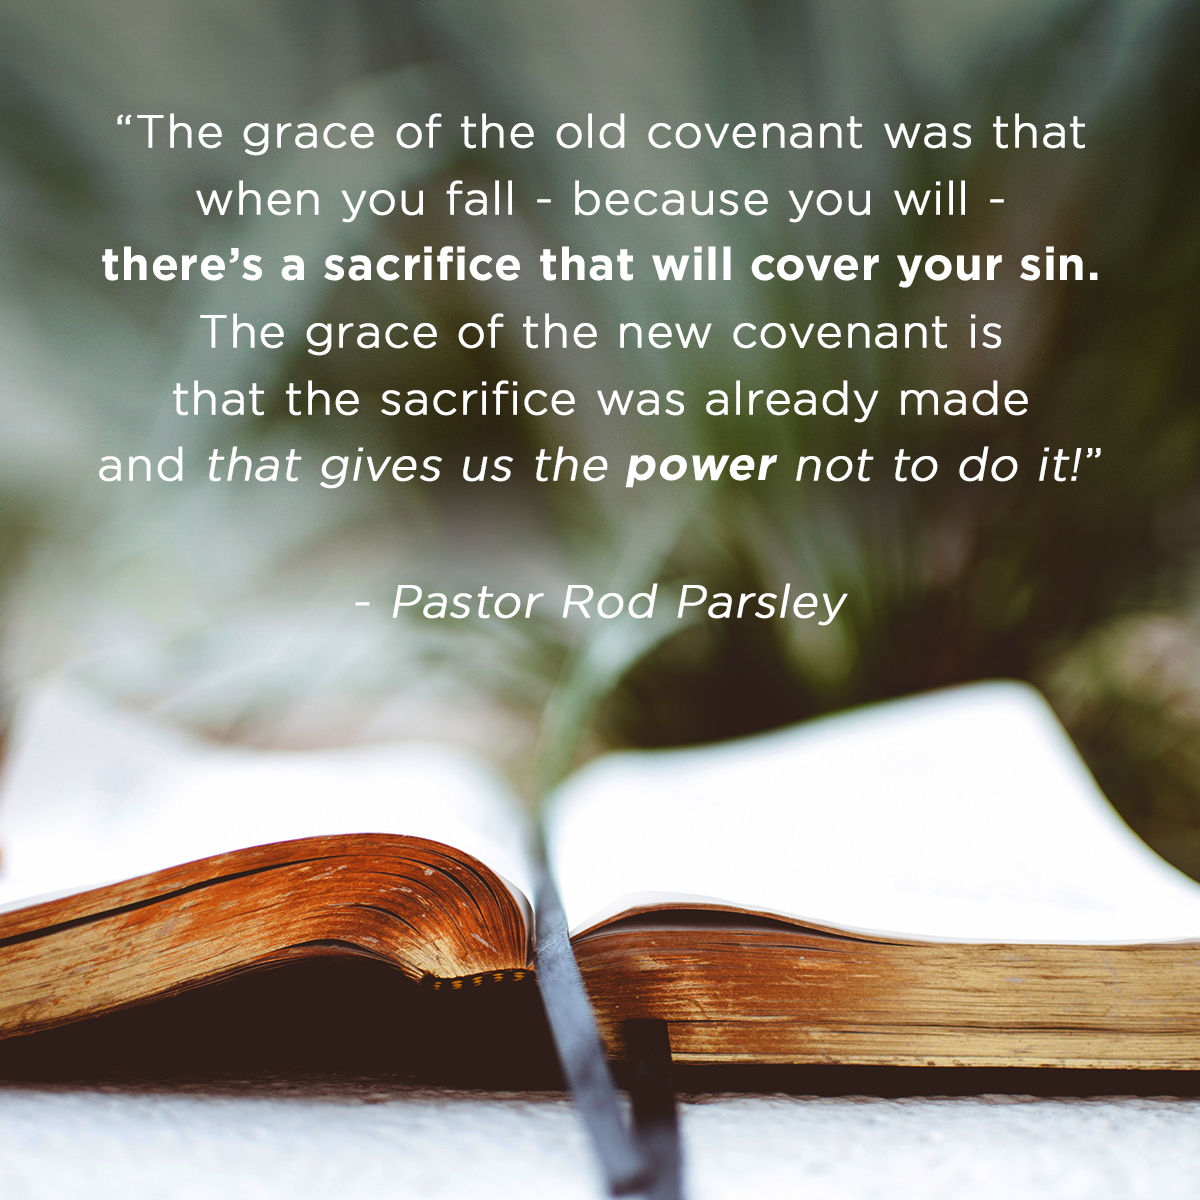 “The grace of the old covenant was that when you fail – because you will – there's a sacrifice that will cover your sin. The grace of the new covenant is that the sacrifice was already made and that gives us the power not to do it!” – Pastor Rod Parsley